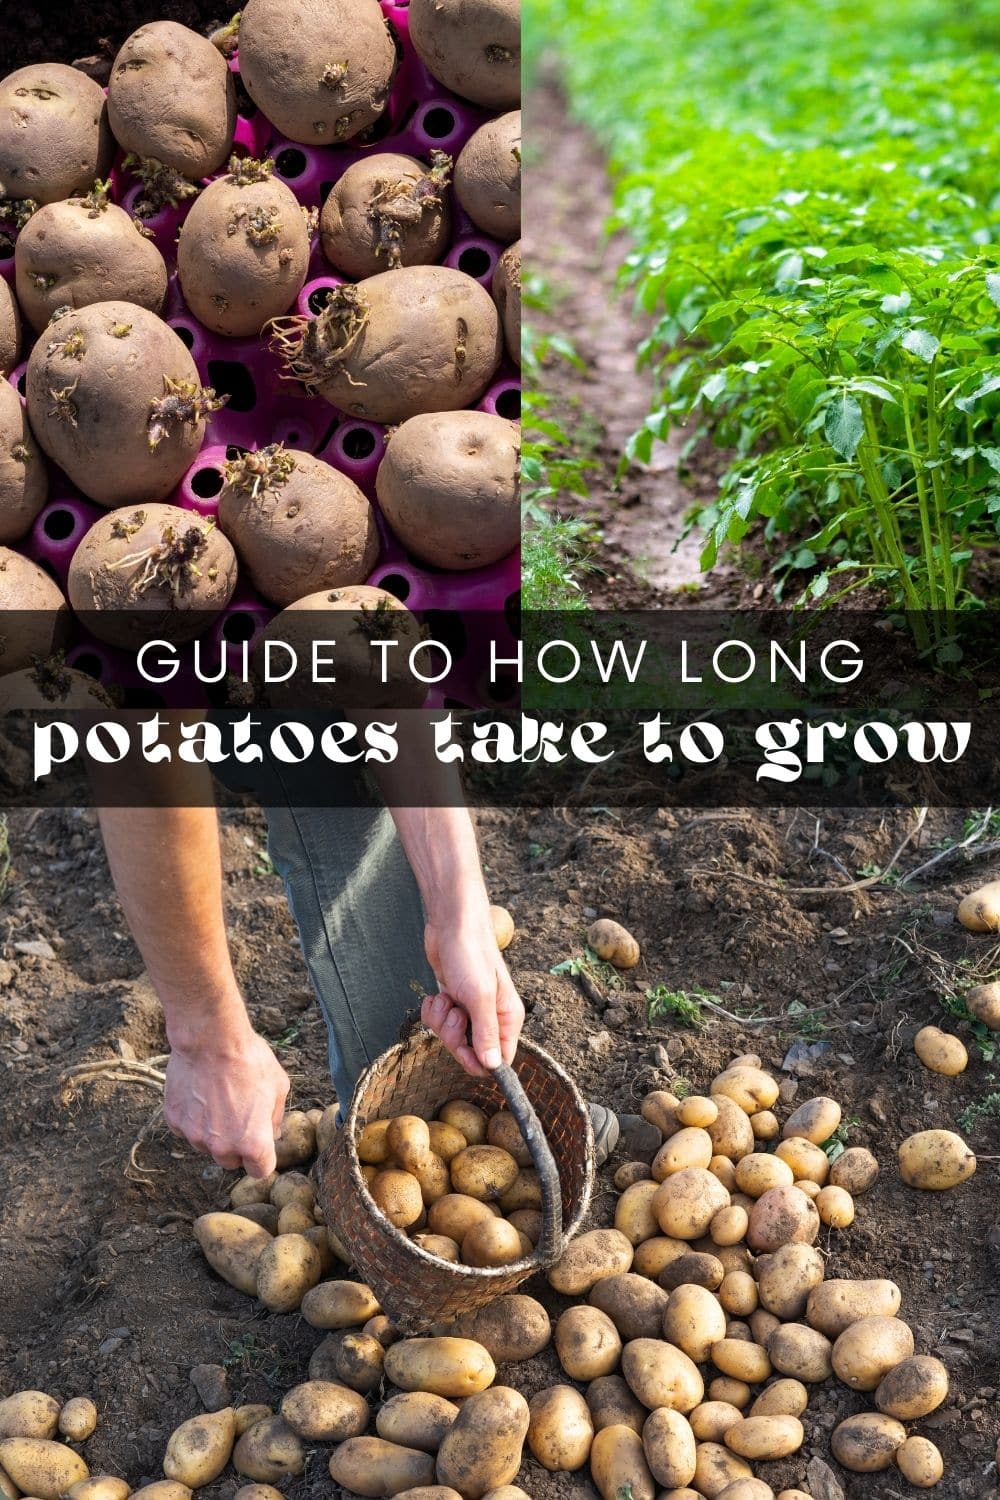 We all love potatoes, right? Whether they're mashed, boiled, roasted, or baked – potatoes are a staple food for many families. And growing your own potatoes is not as difficult as it might seem! In fact, potatoes are pretty low-maintenance vegetables and can be grown in your garden or even in pots. But how long do potatoes take to grow?